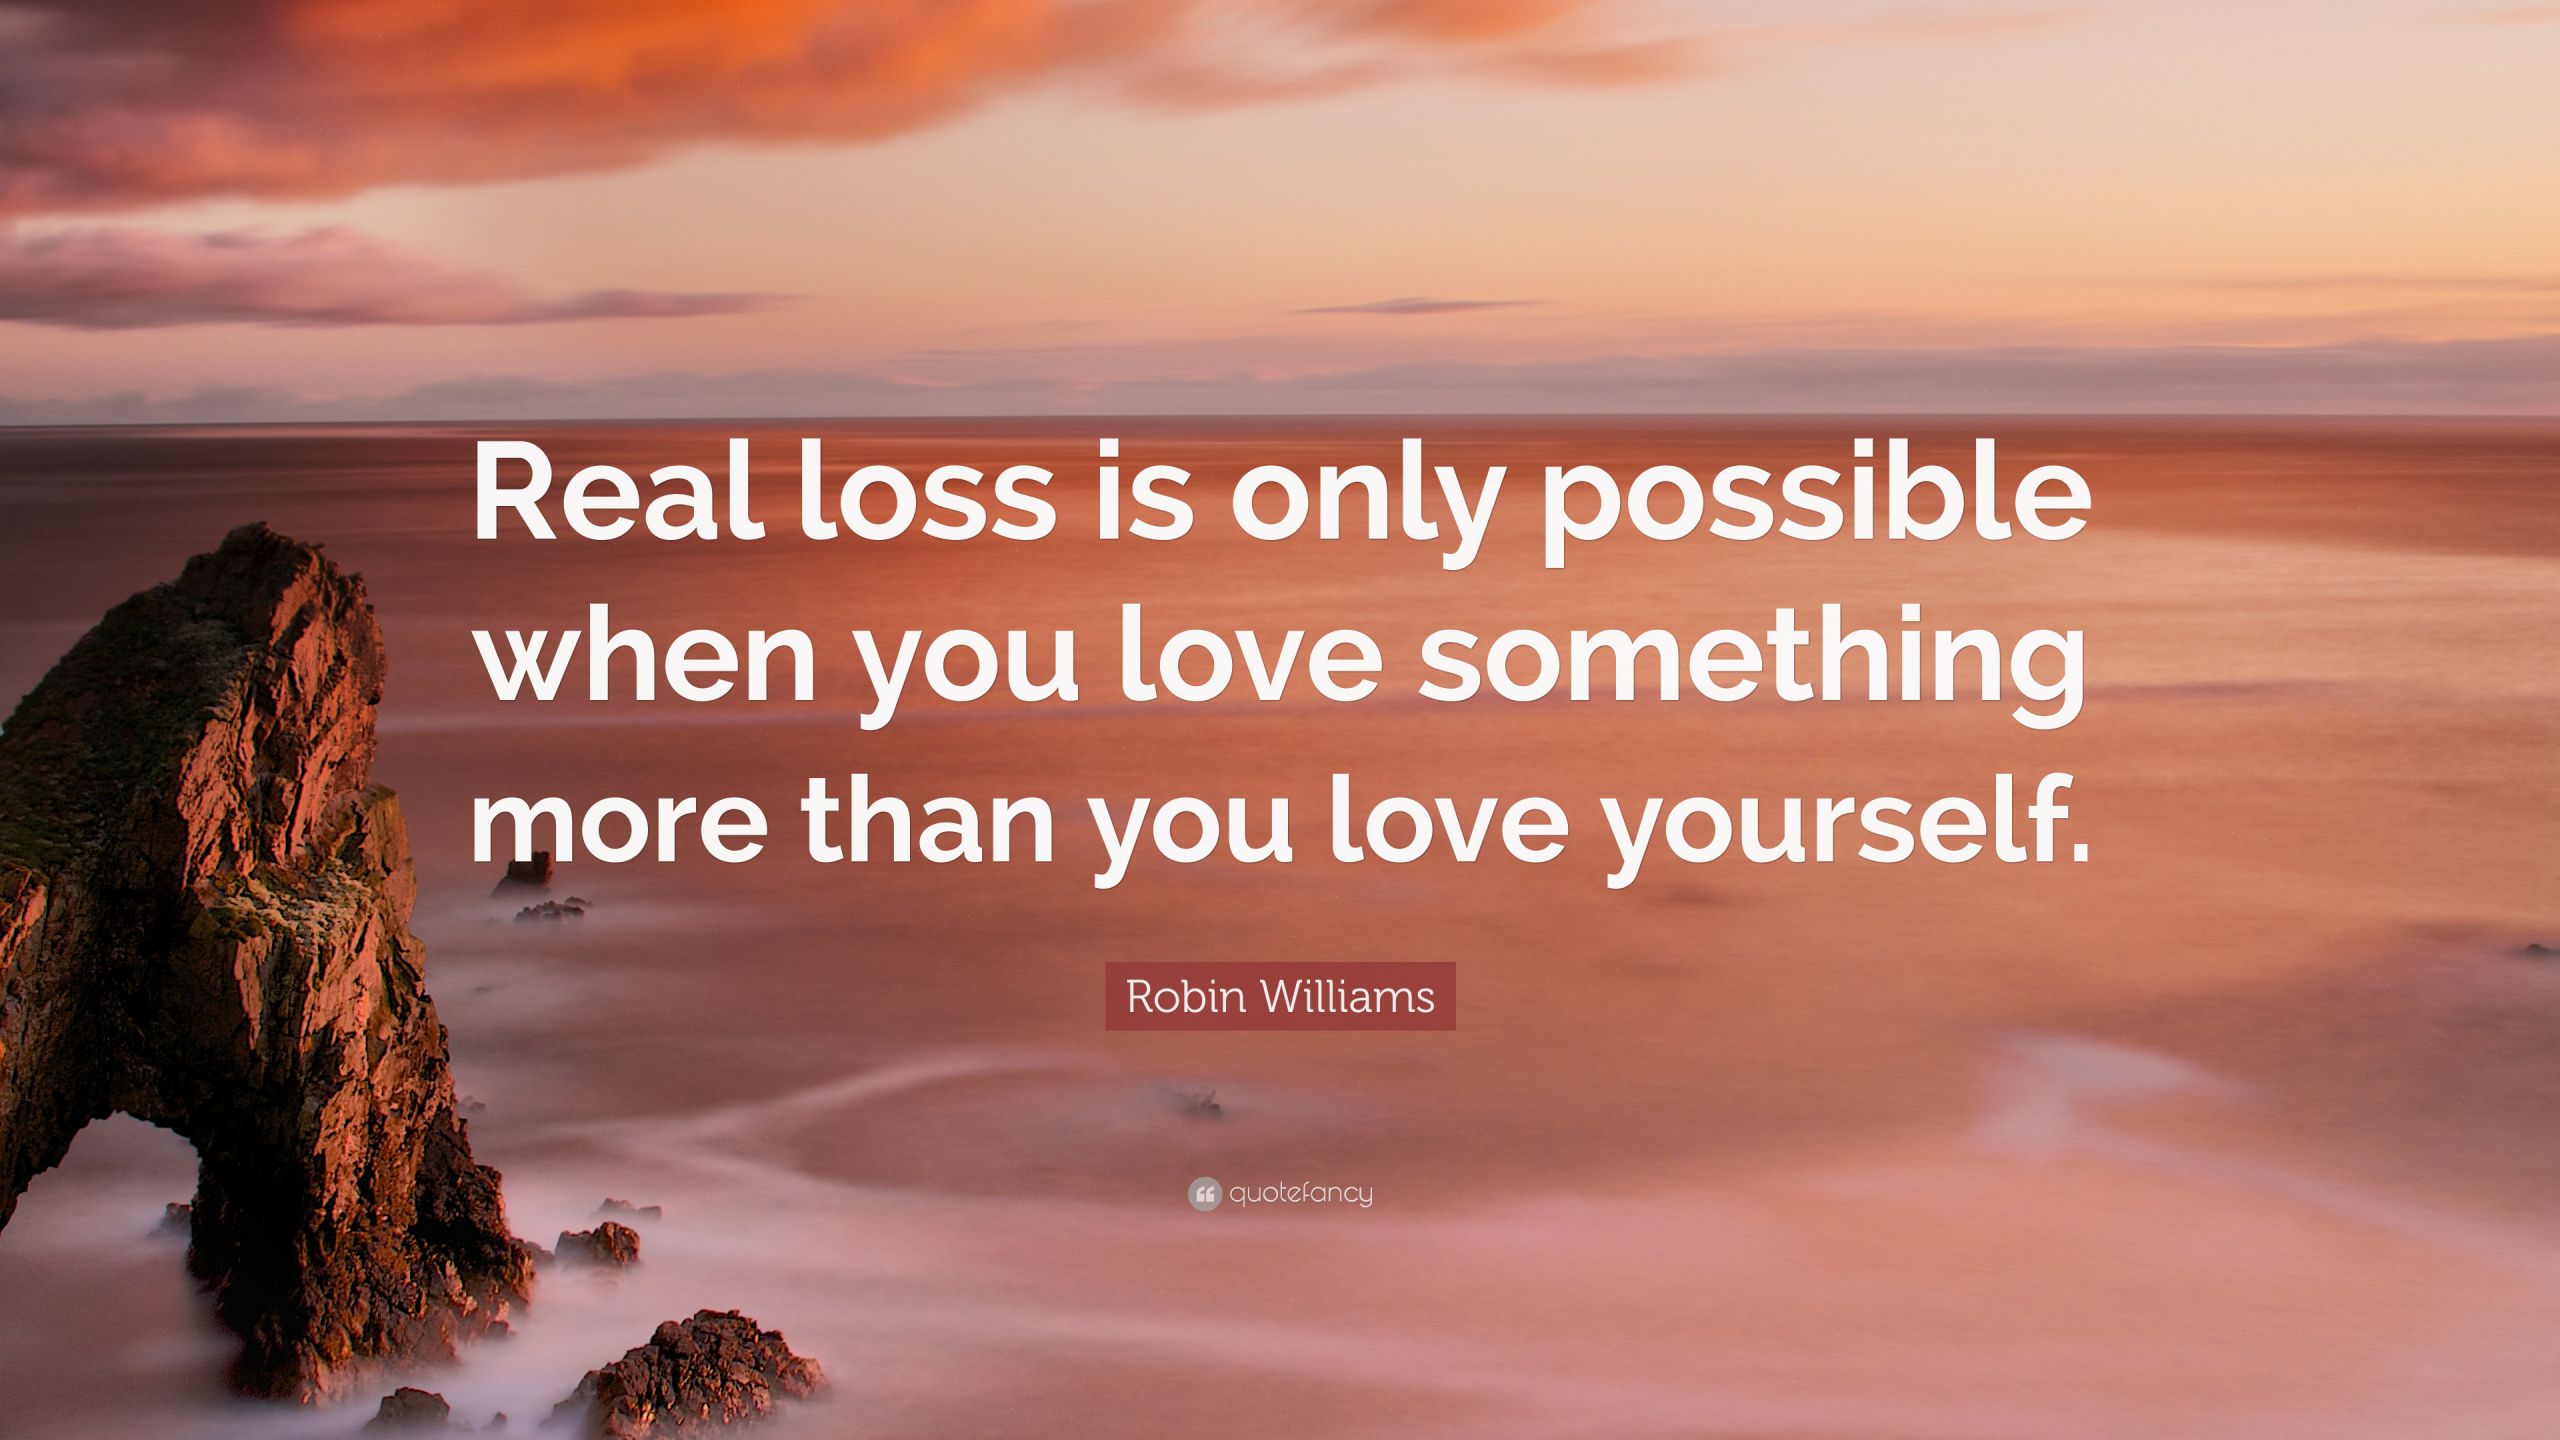 Quotes About Love And Loss
 Losing The e U Love Quotes Inspirational Quotes About